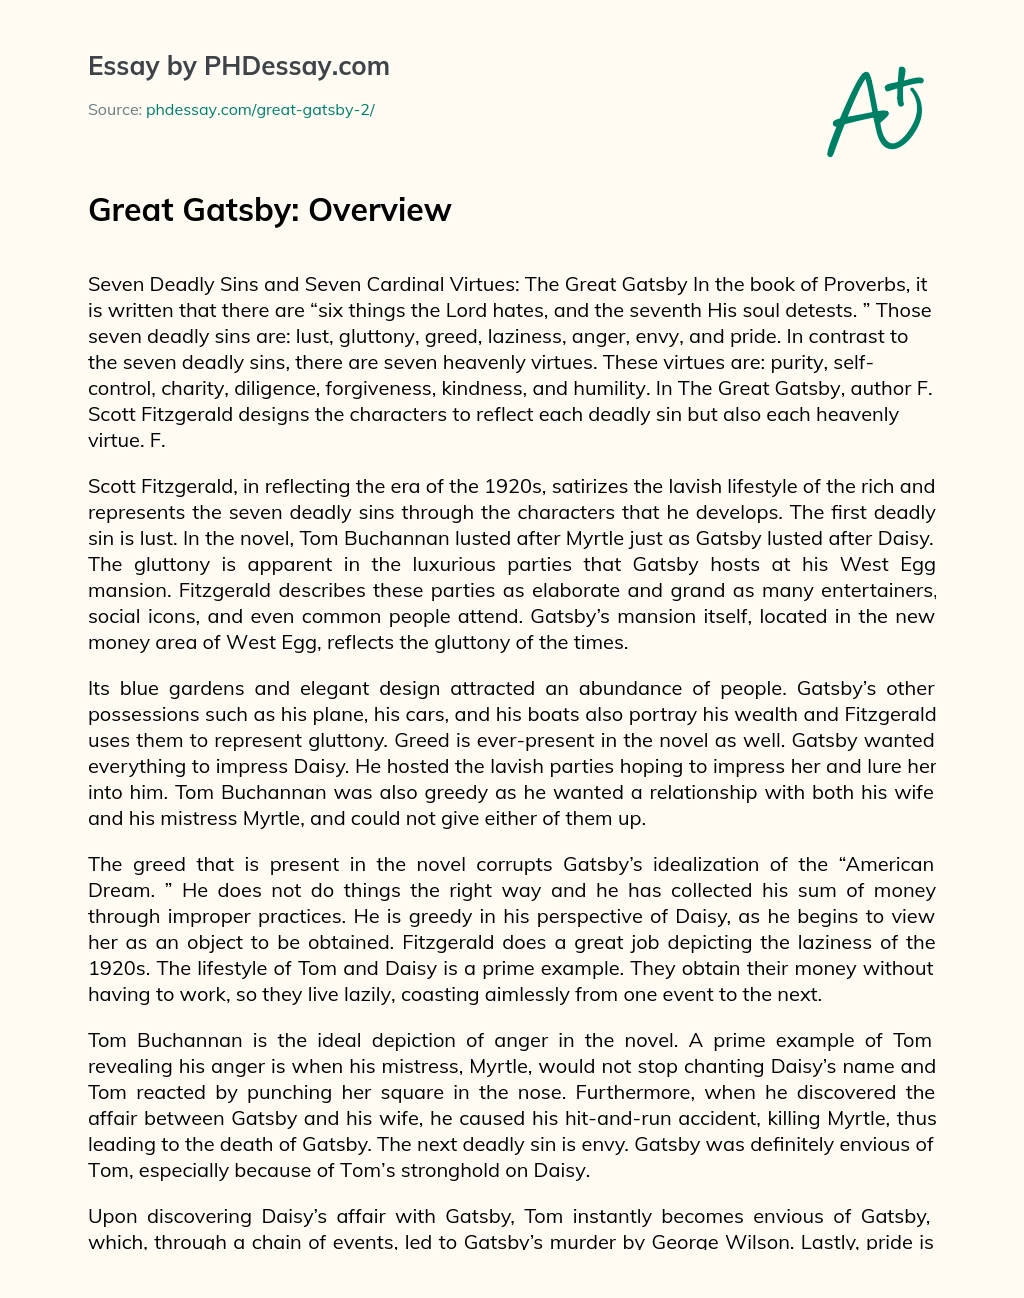 Great Gatsby: Overview essay